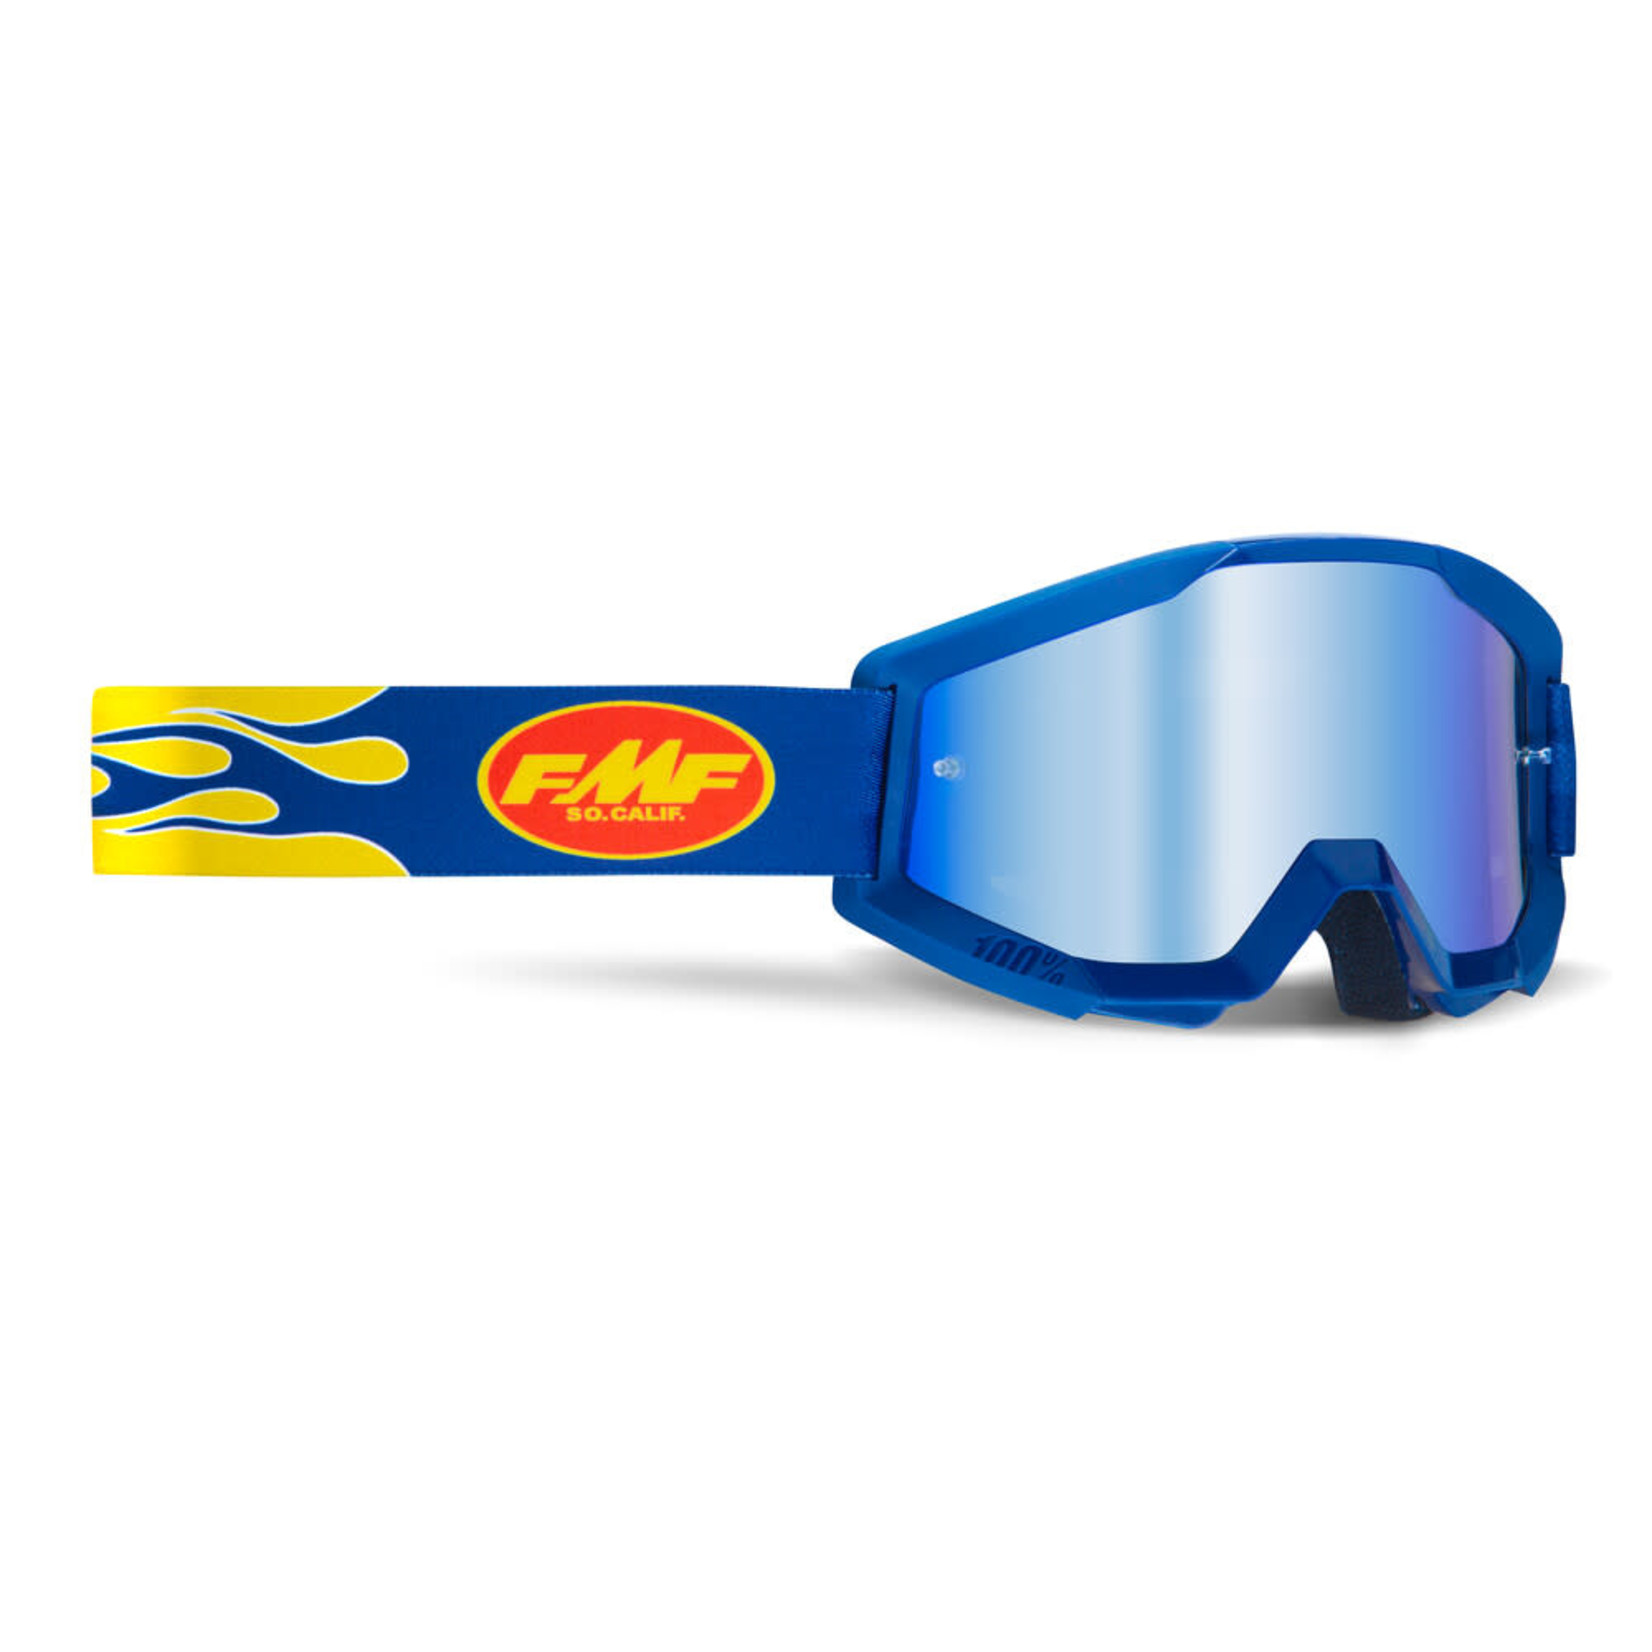 FMF VISION POWERCORE GOGGLE FLAME NAVY MIRROR BLUE LENS